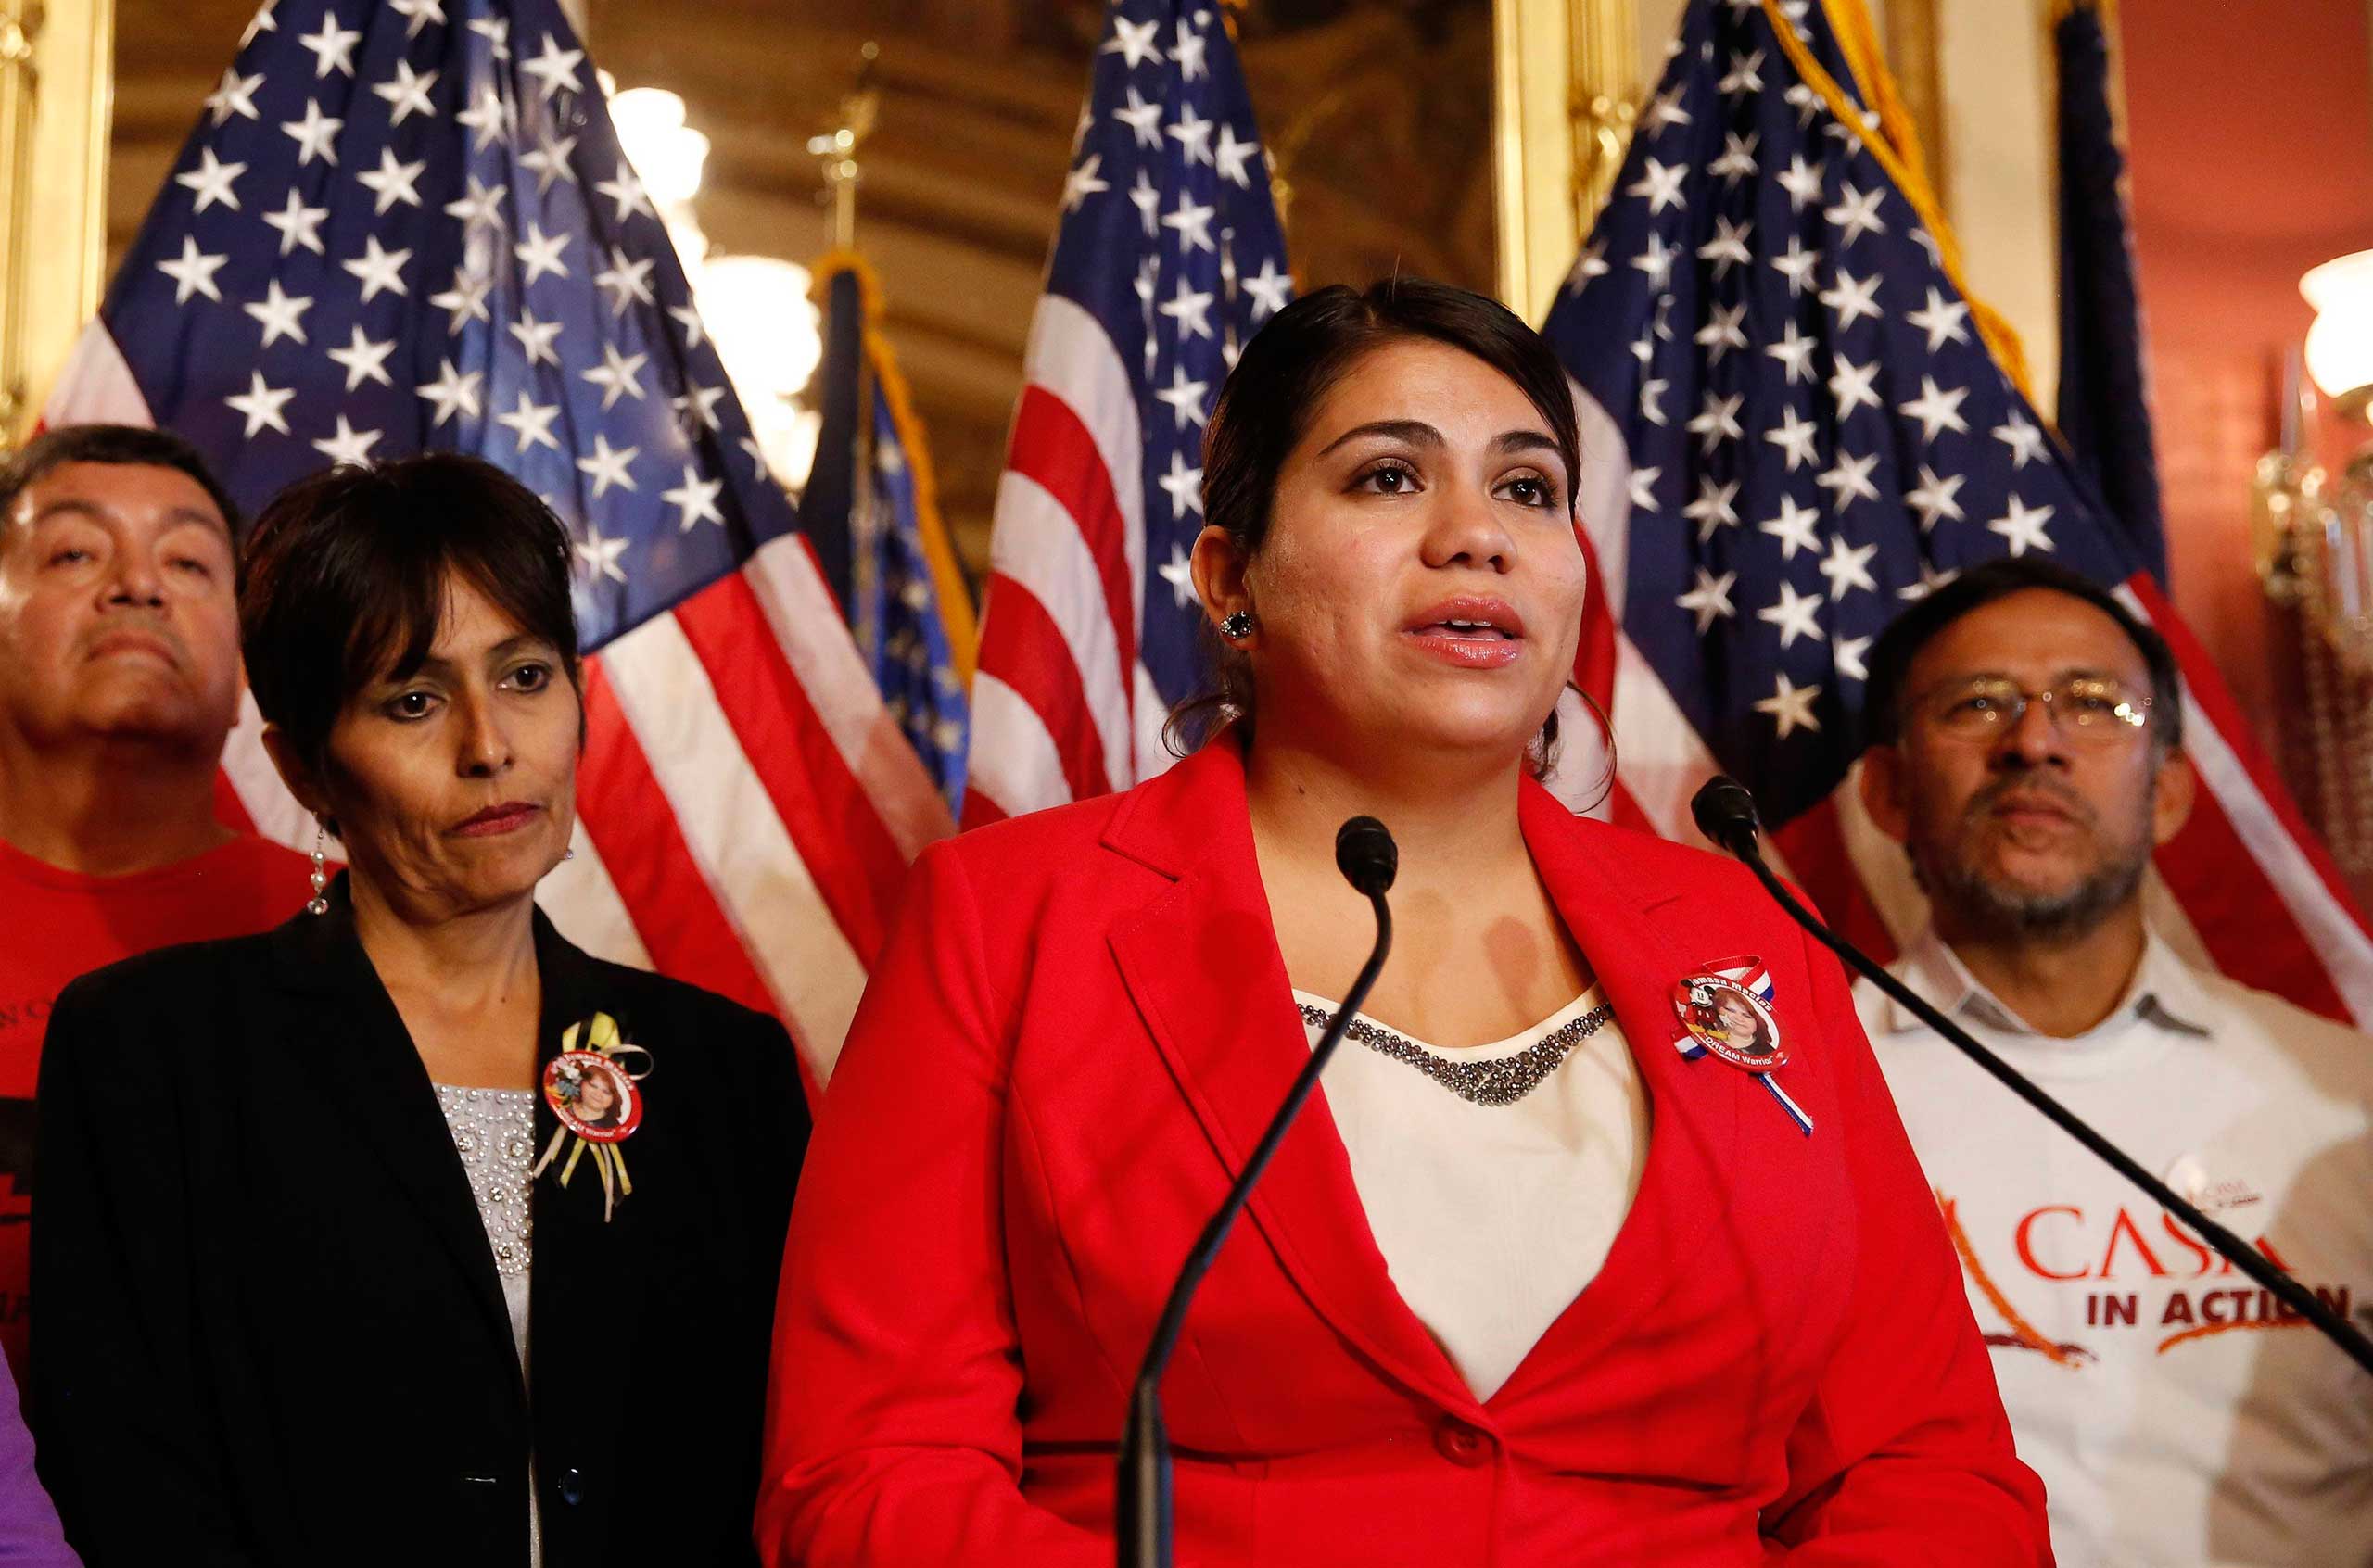 Immigration activist Astrid Silva (in red) stands next to her mother, Barbara Silva, as she speaks about immigration reform at a news conference on Capitol Hill in Washington, Dec. 10, 2014. (Larry Downing—Reuters)